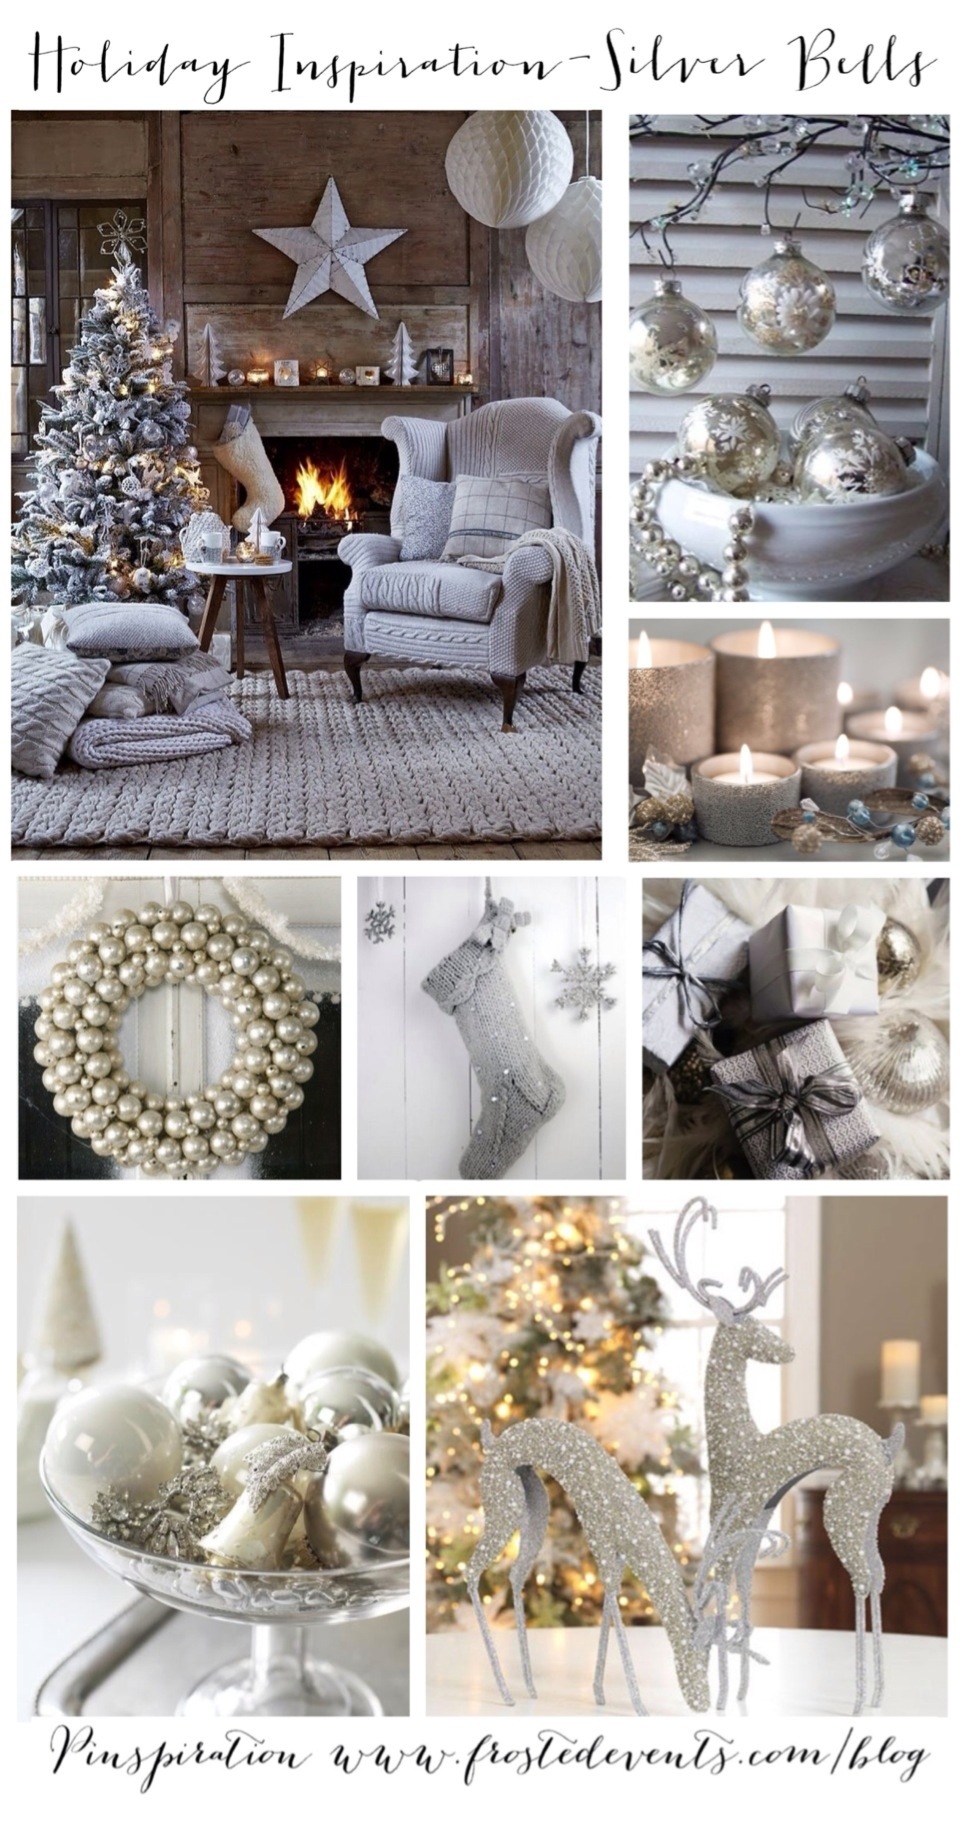 Holiday Inspiration- Silver Bells www.frostedevents.com Christmas Ideas